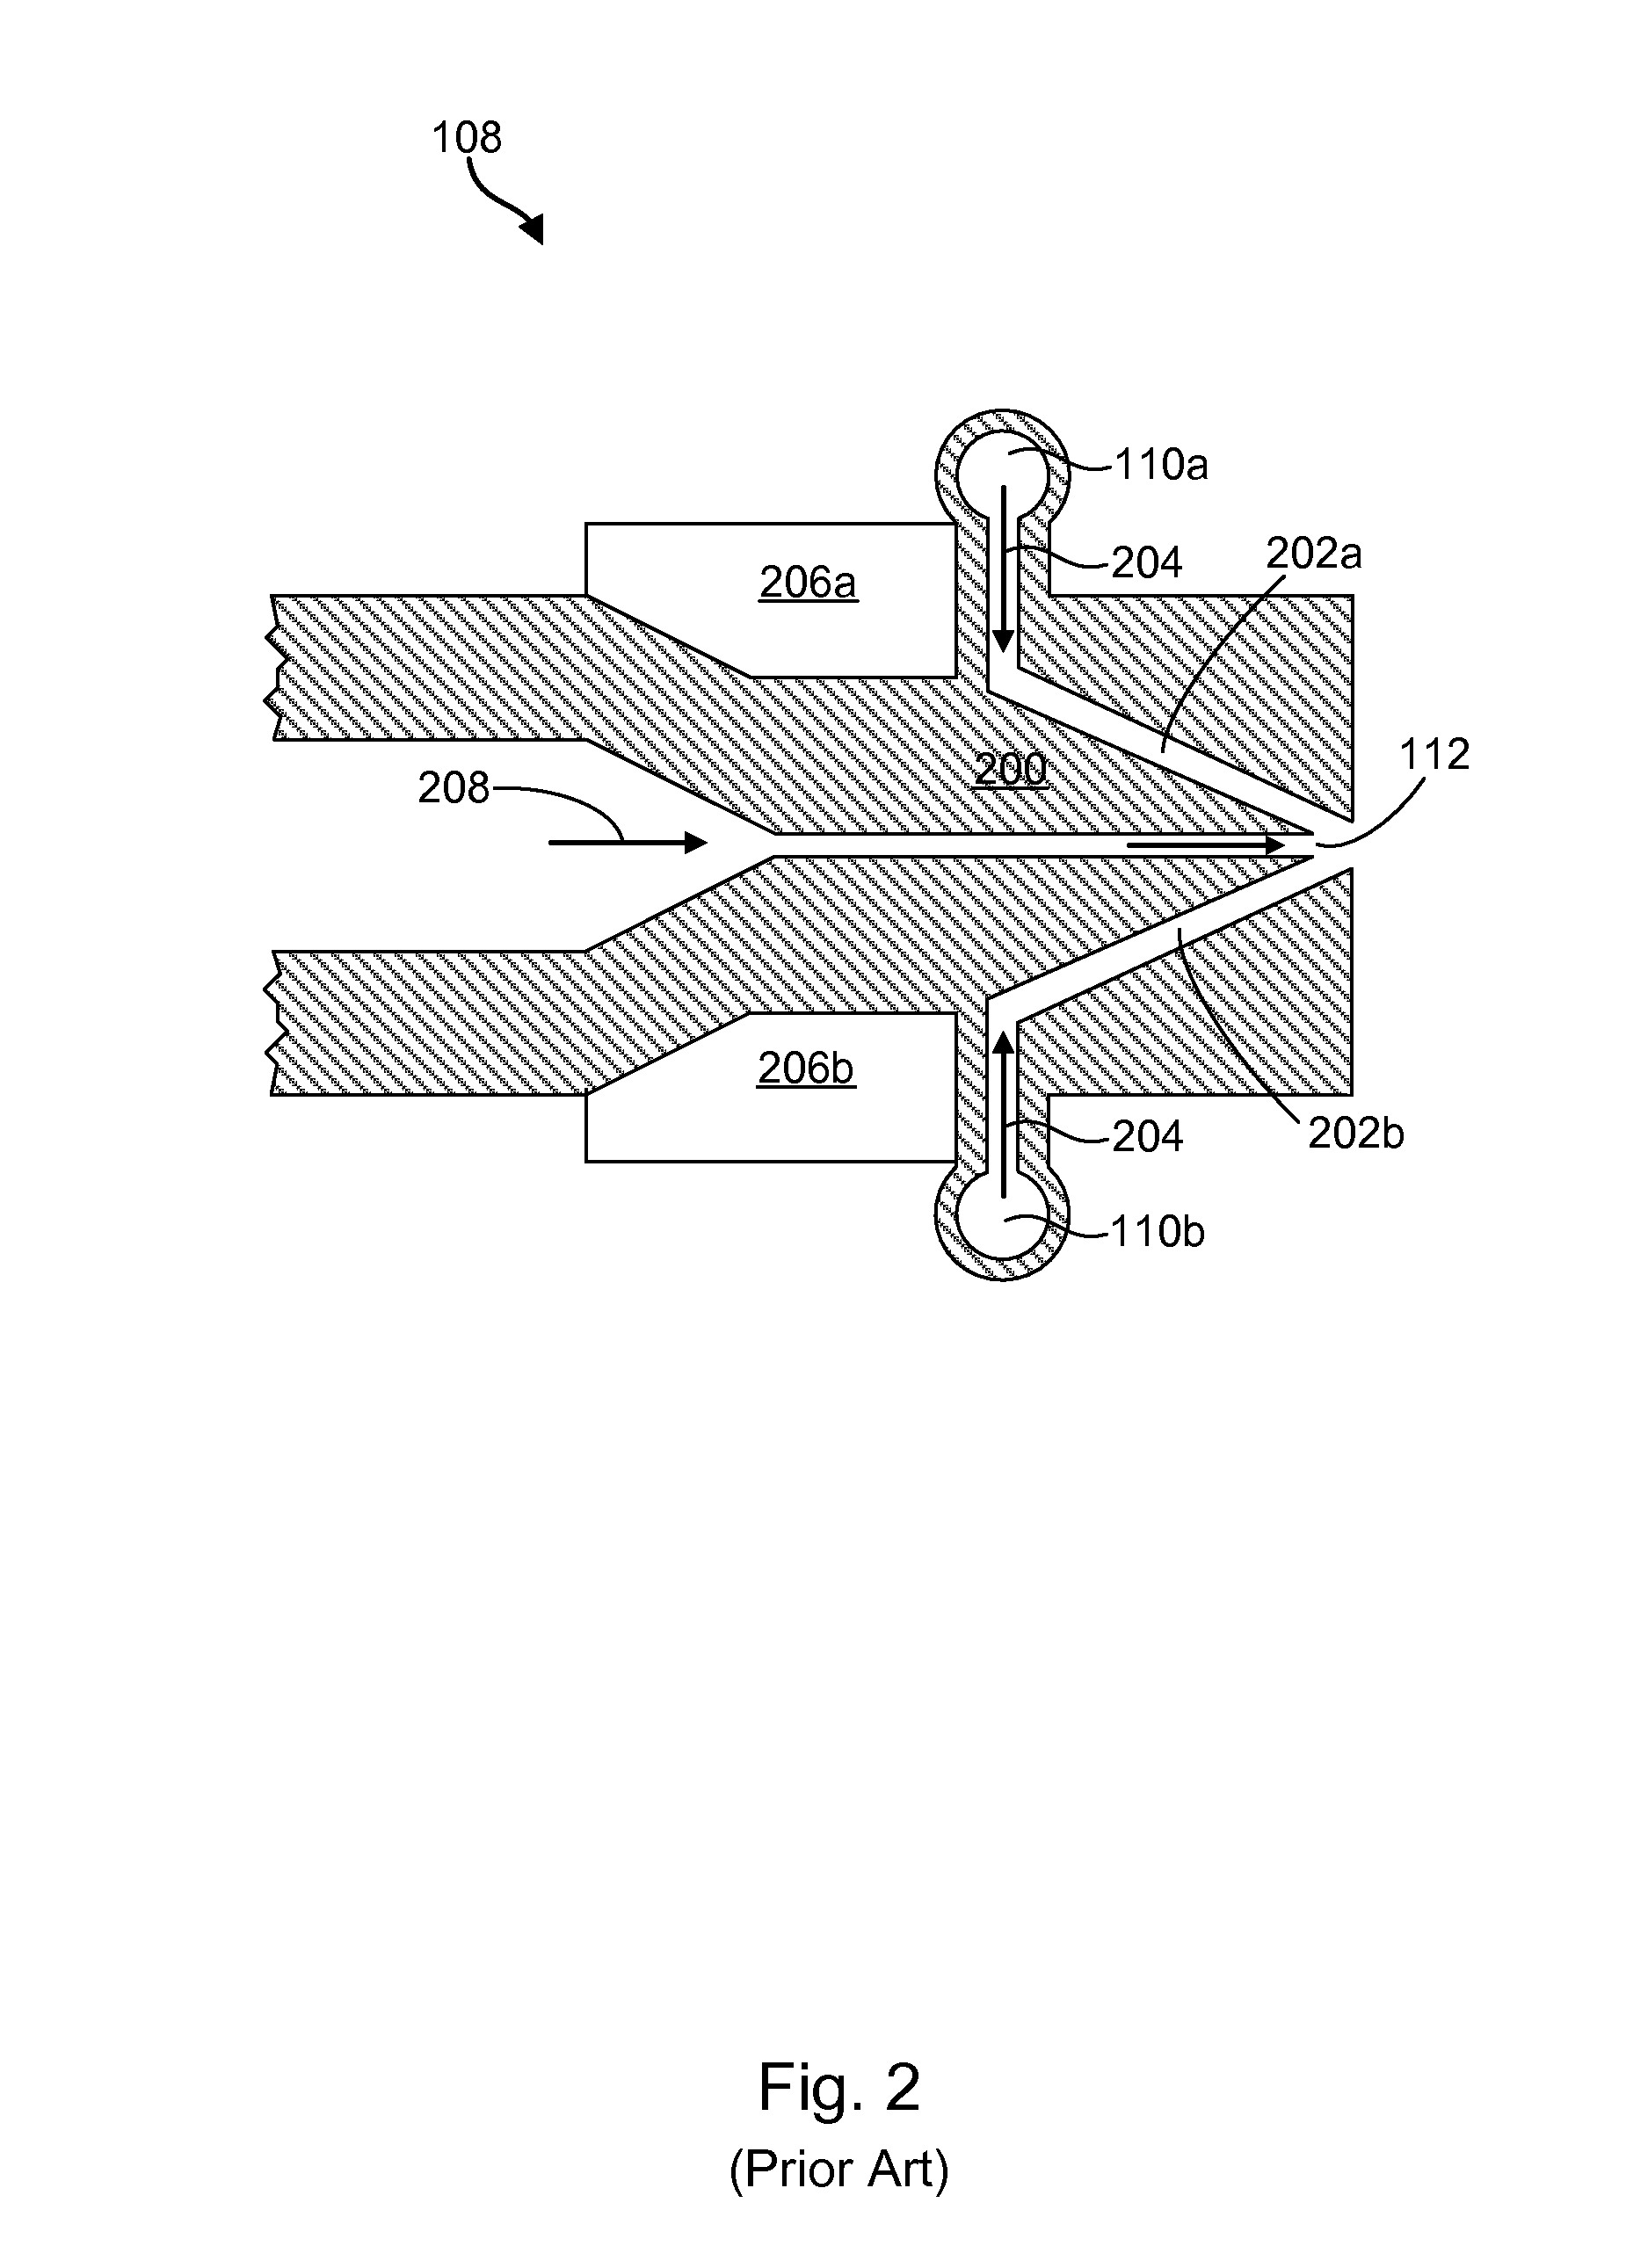 Apparatus, system, and method for maximizing ultrafine meltblown fiber attenuation